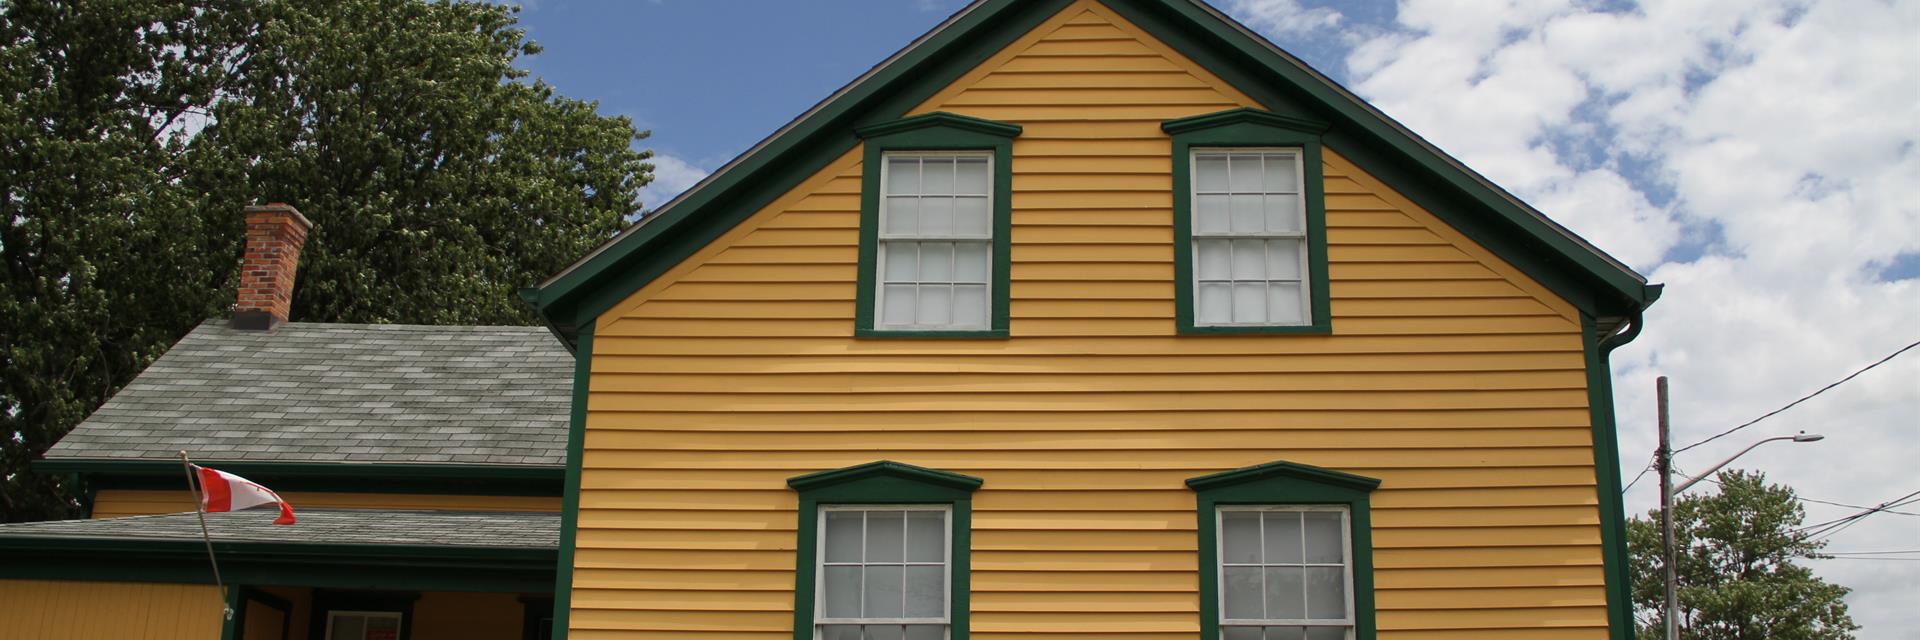 yellow and green house in downtown tilbury